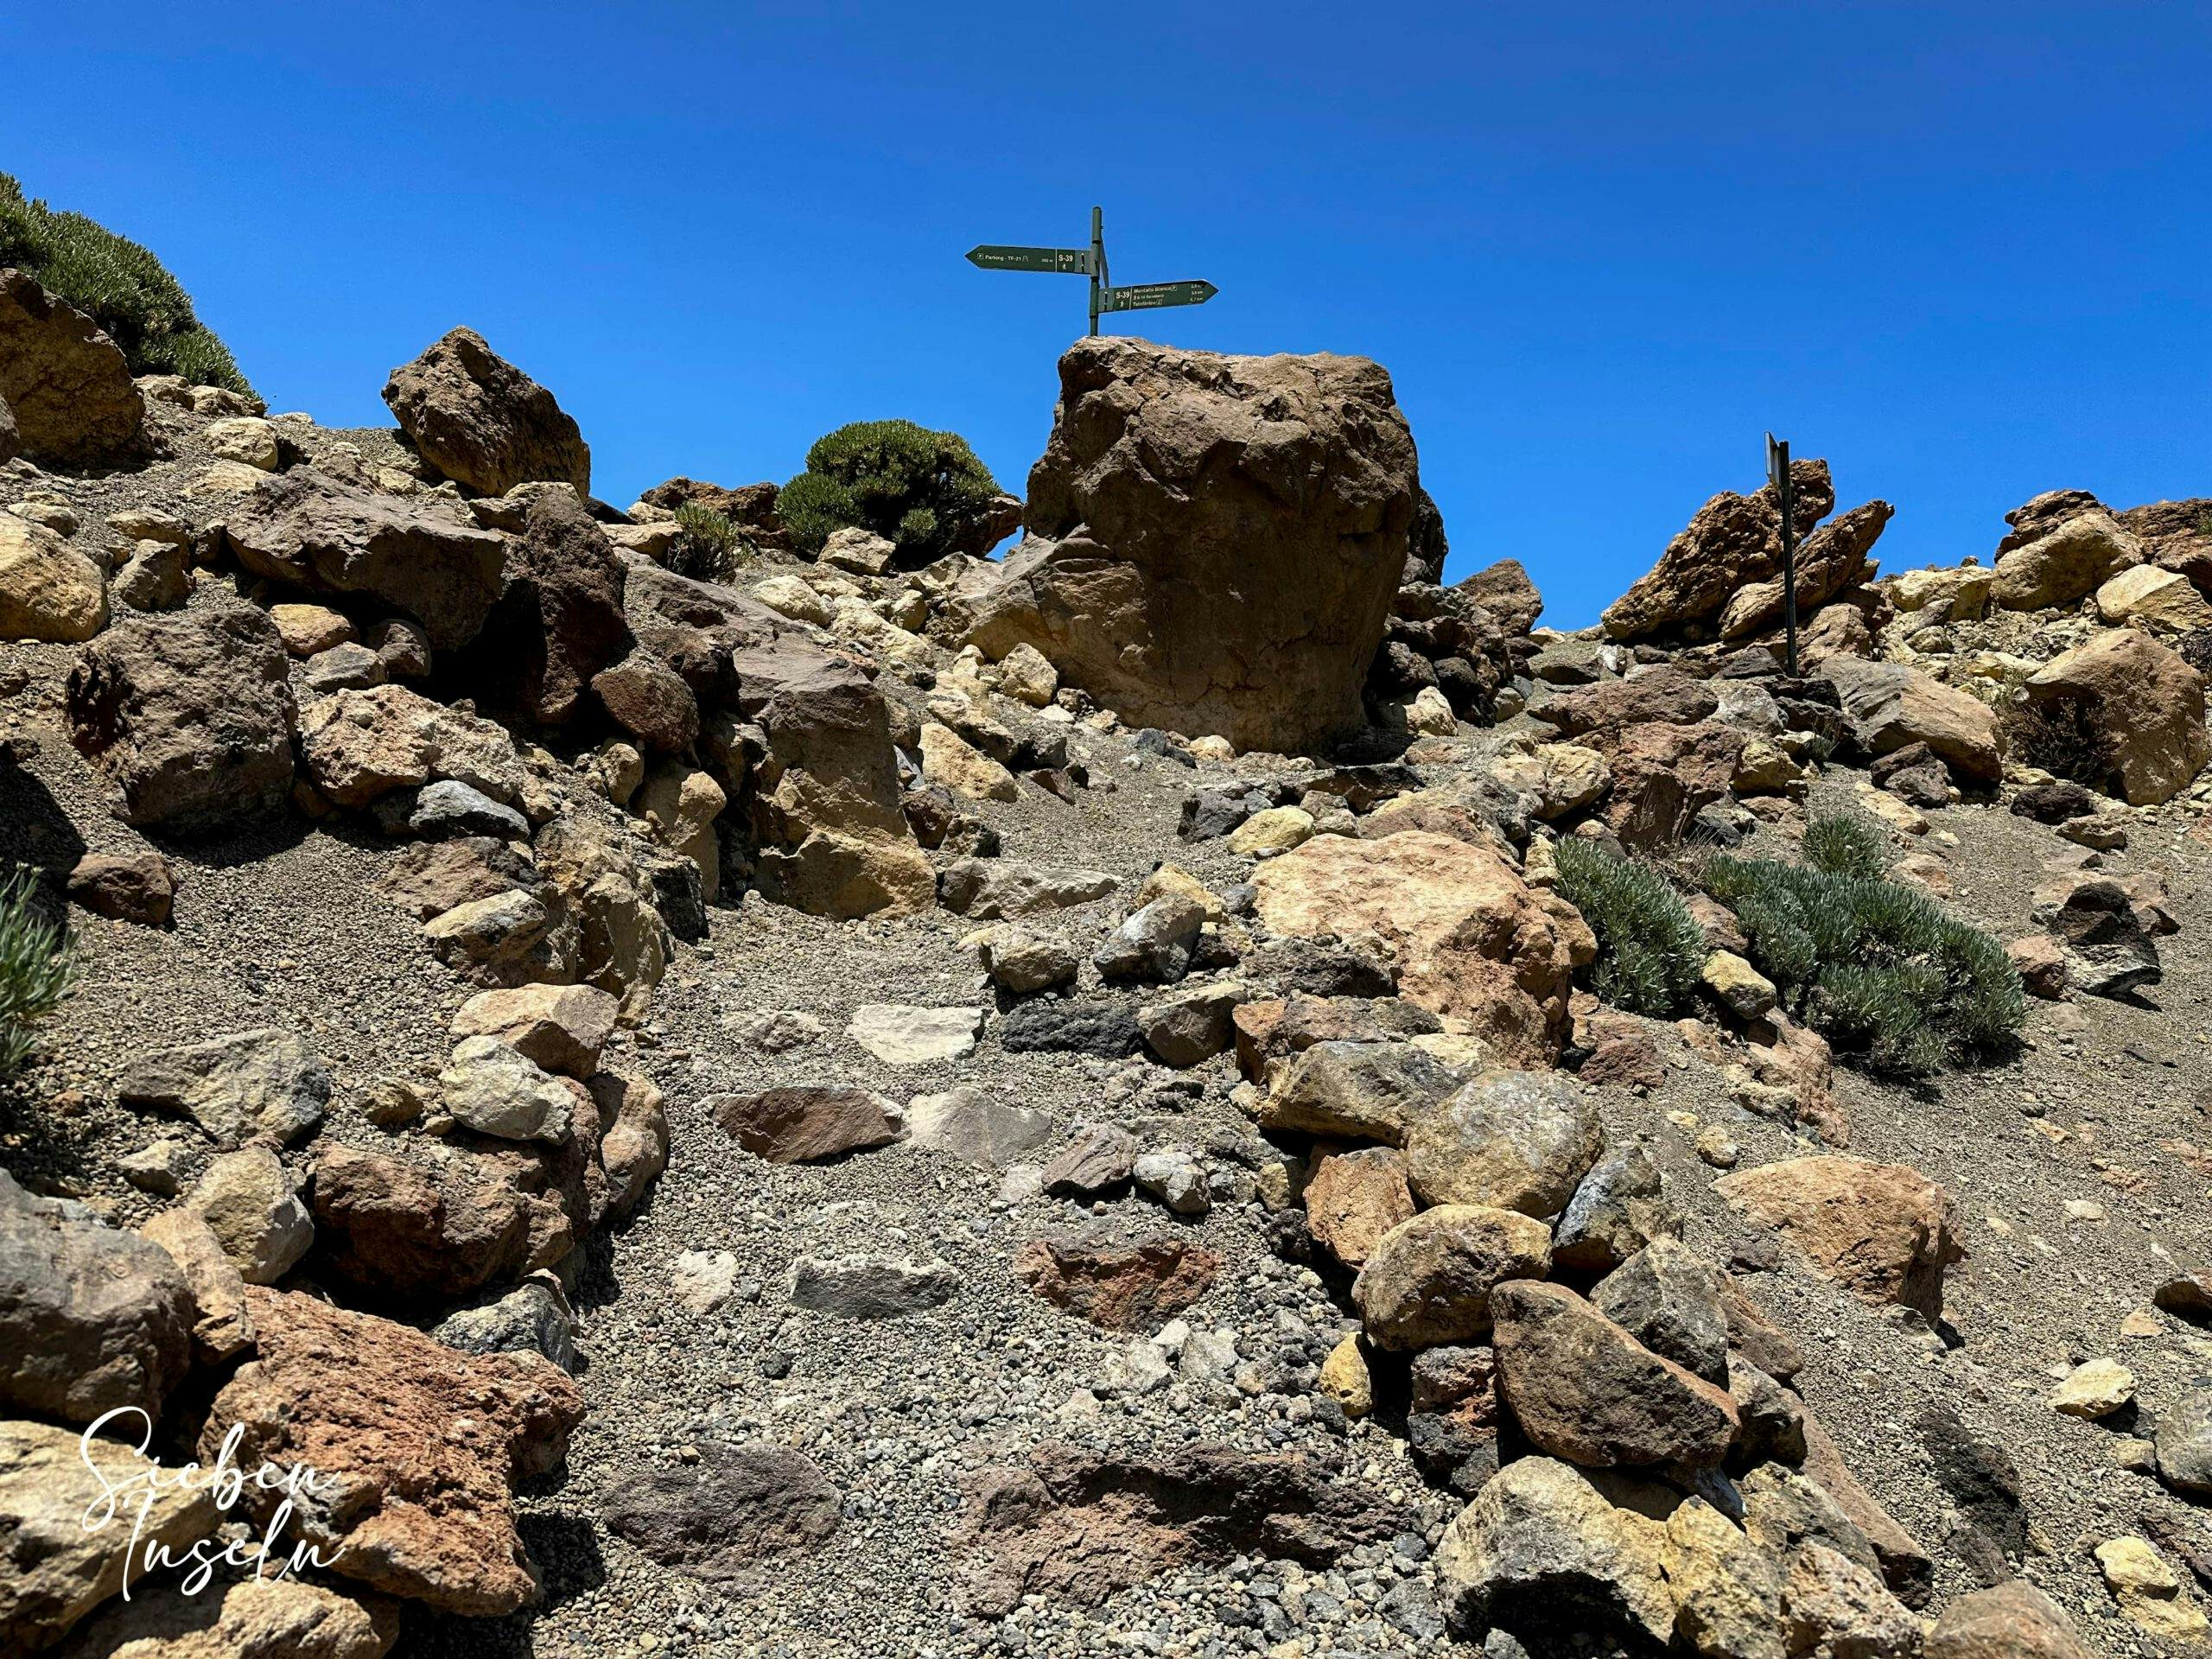 Hiking junction at Mirador Minas de San José - ascent path before the end of the hike